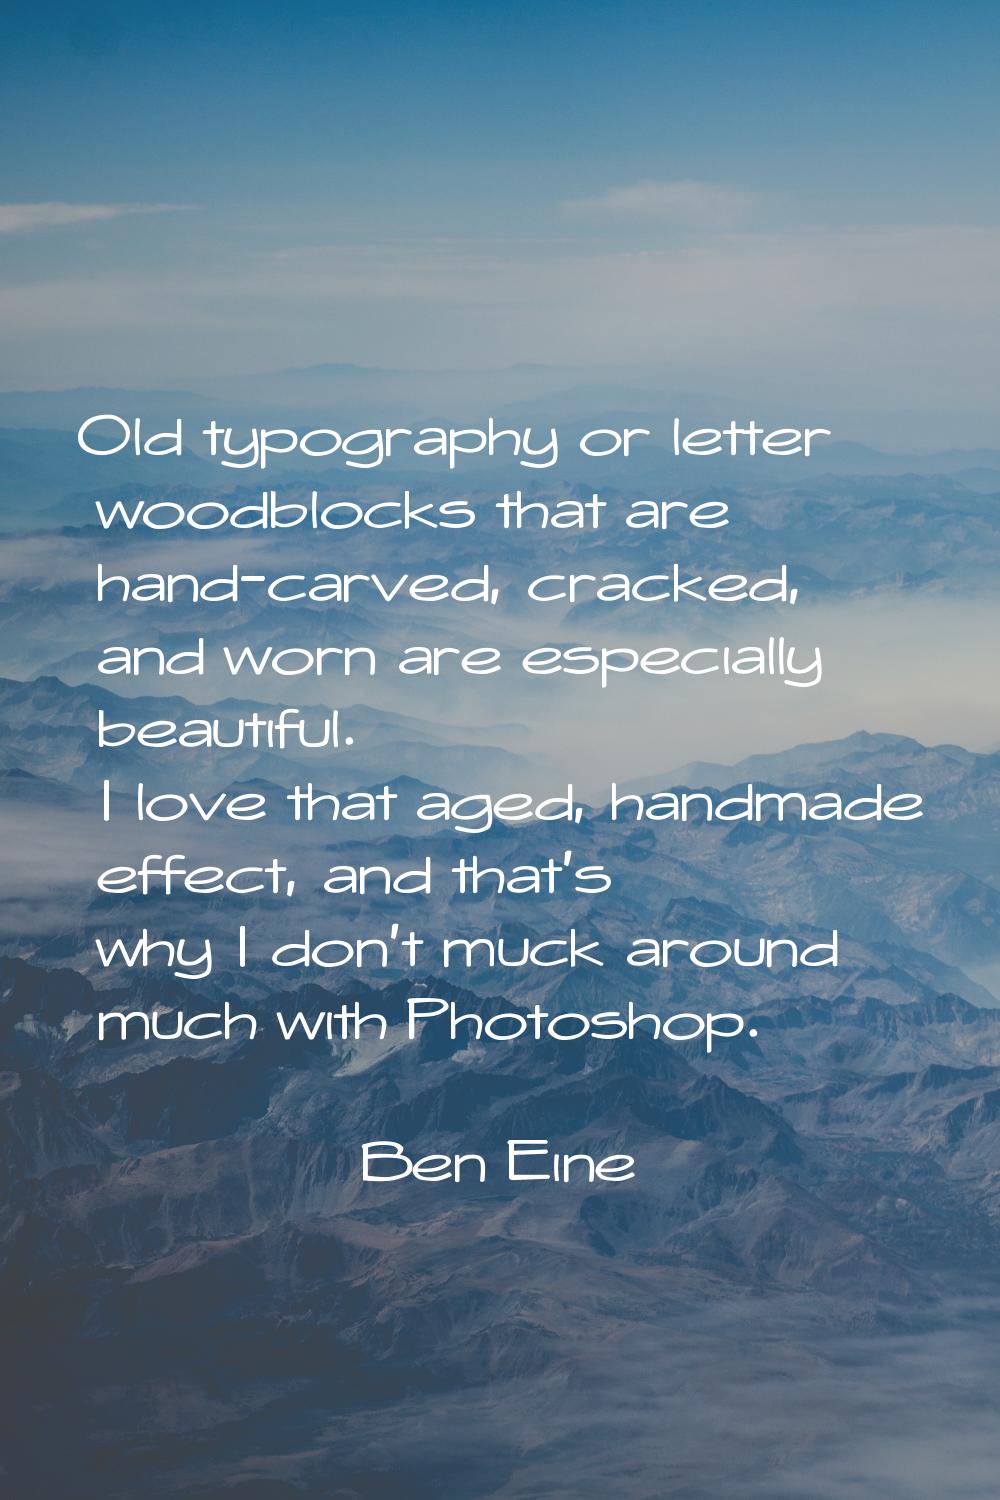 Old typography or letter woodblocks that are hand-carved, cracked, and worn are especially beautifu